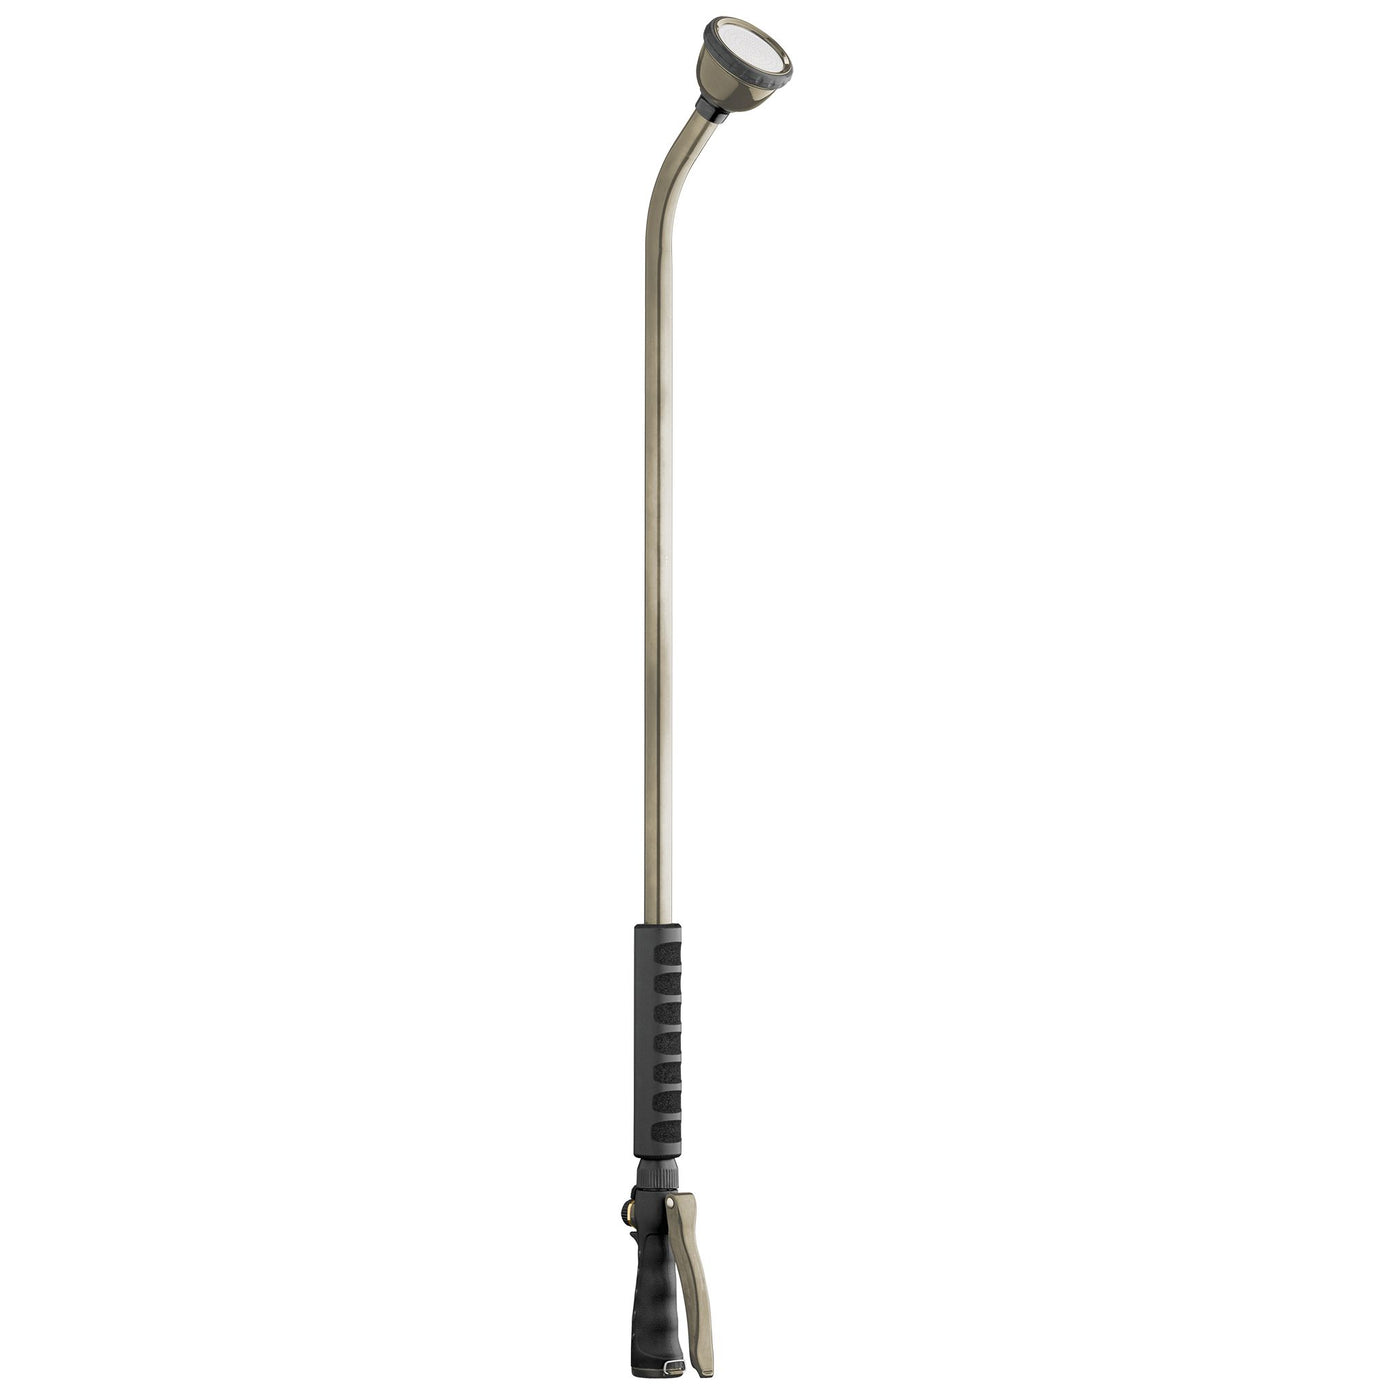 Thirty six inch metal shower head, front trigger wand with comfort foam grip and flow control. 